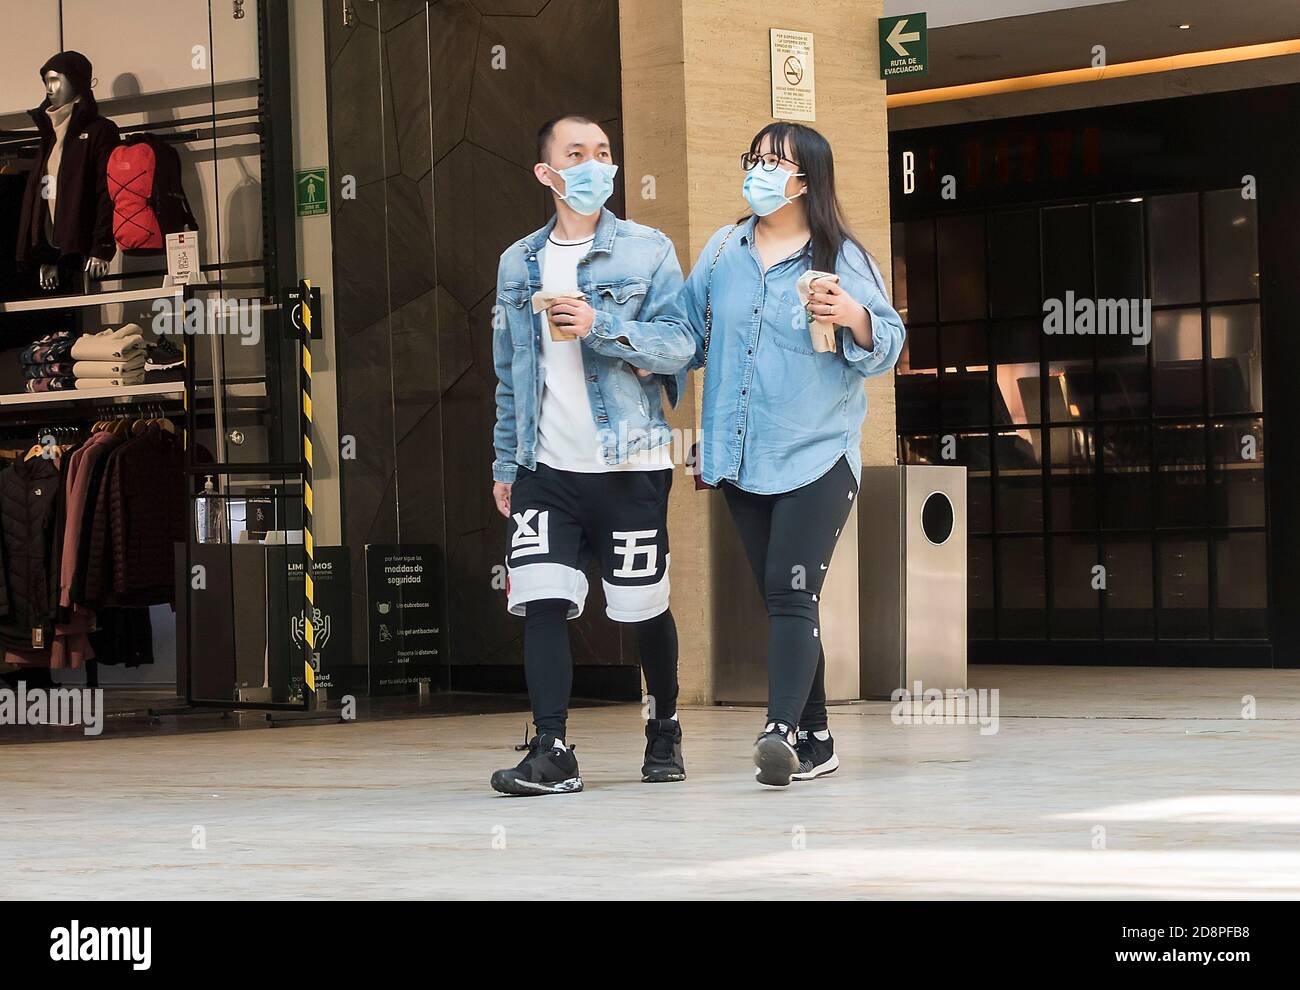 Two people in Antara shopping mall, Mexico City, Mexico with face masks during the Covid-19 pandemic Stock Photo